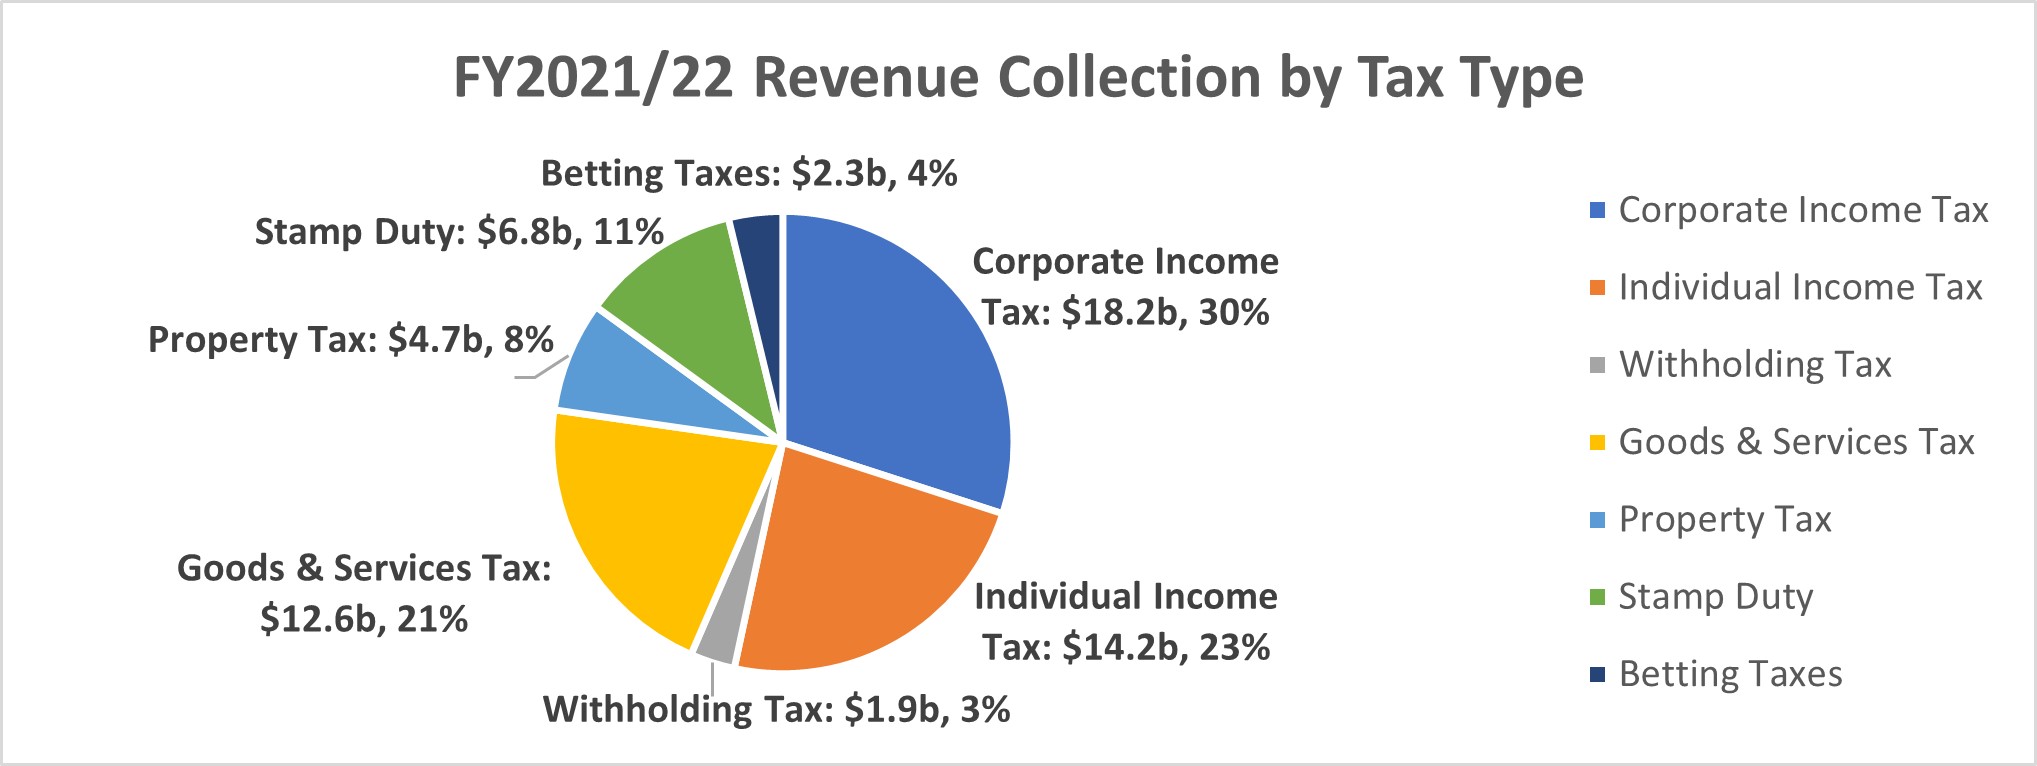 FY2021 Revenue Collection by Tax Type